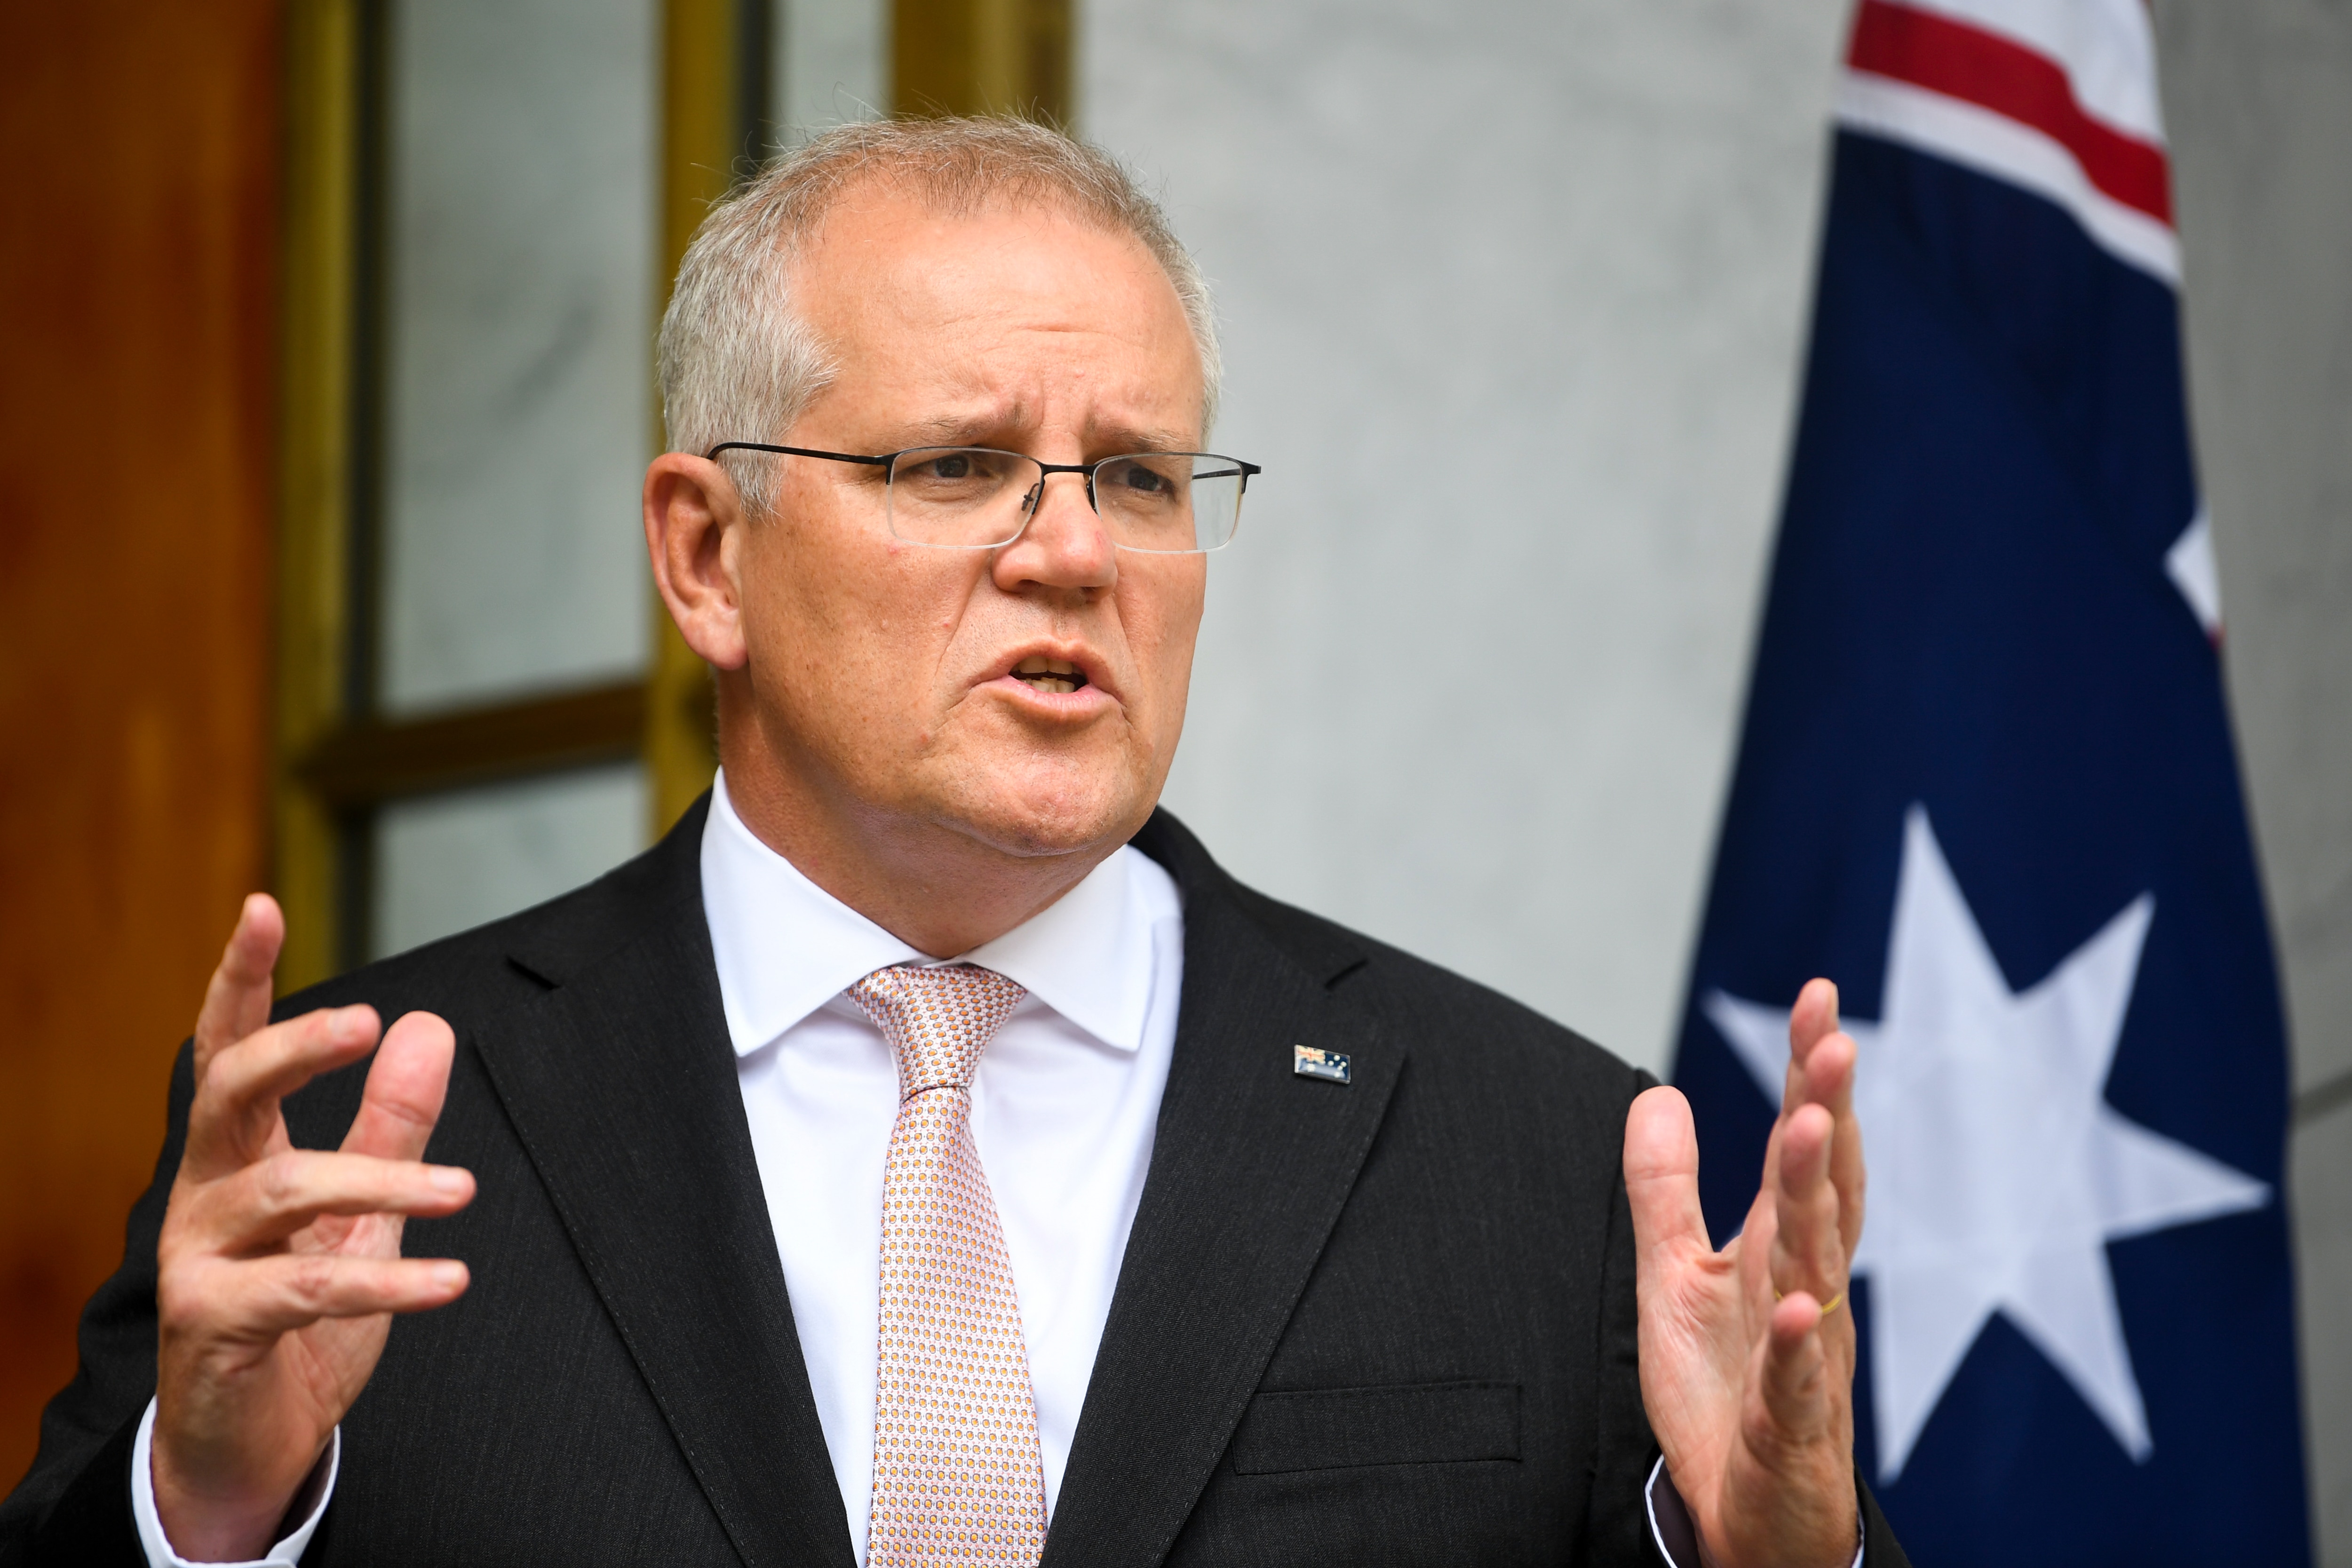 Australian Prime Minister Scott Morrison speaks to the media during a press conference following a national cabinet meeting, at Parliament House in Canberra.